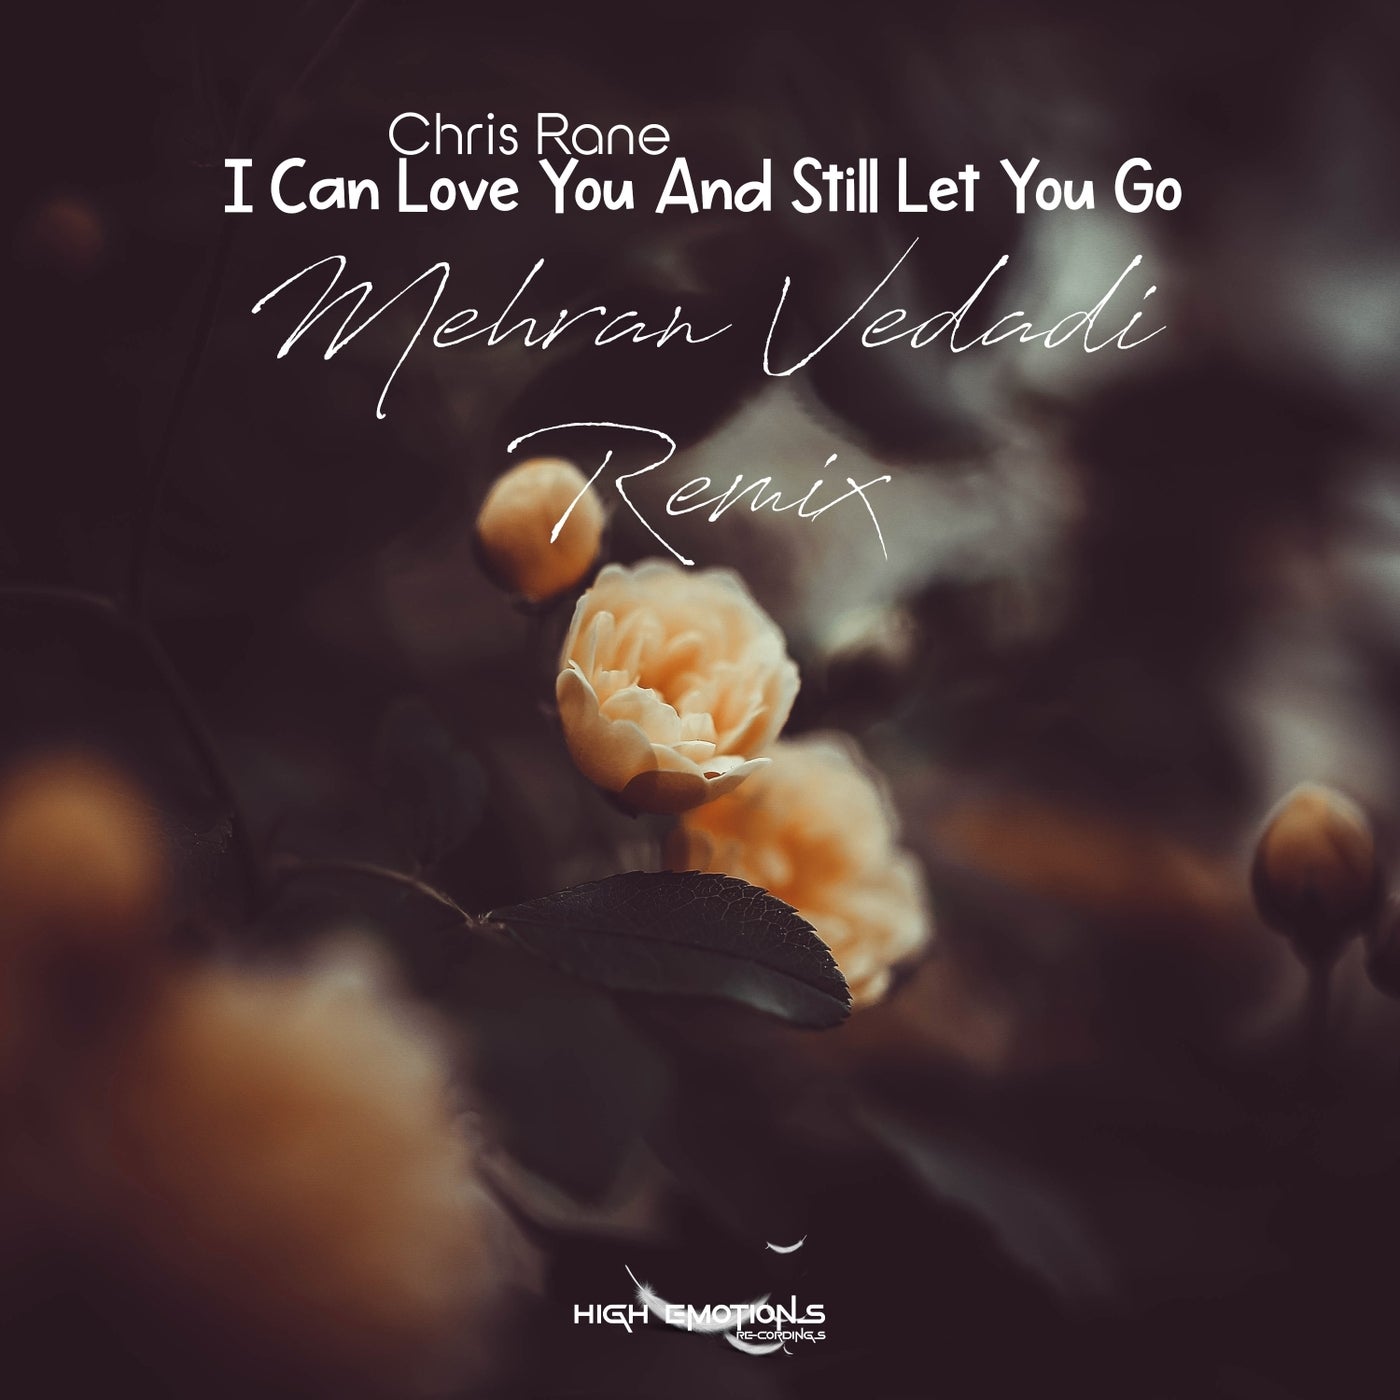 I Can Love You and Still Let You Go (Mehran Vedadi Remix)